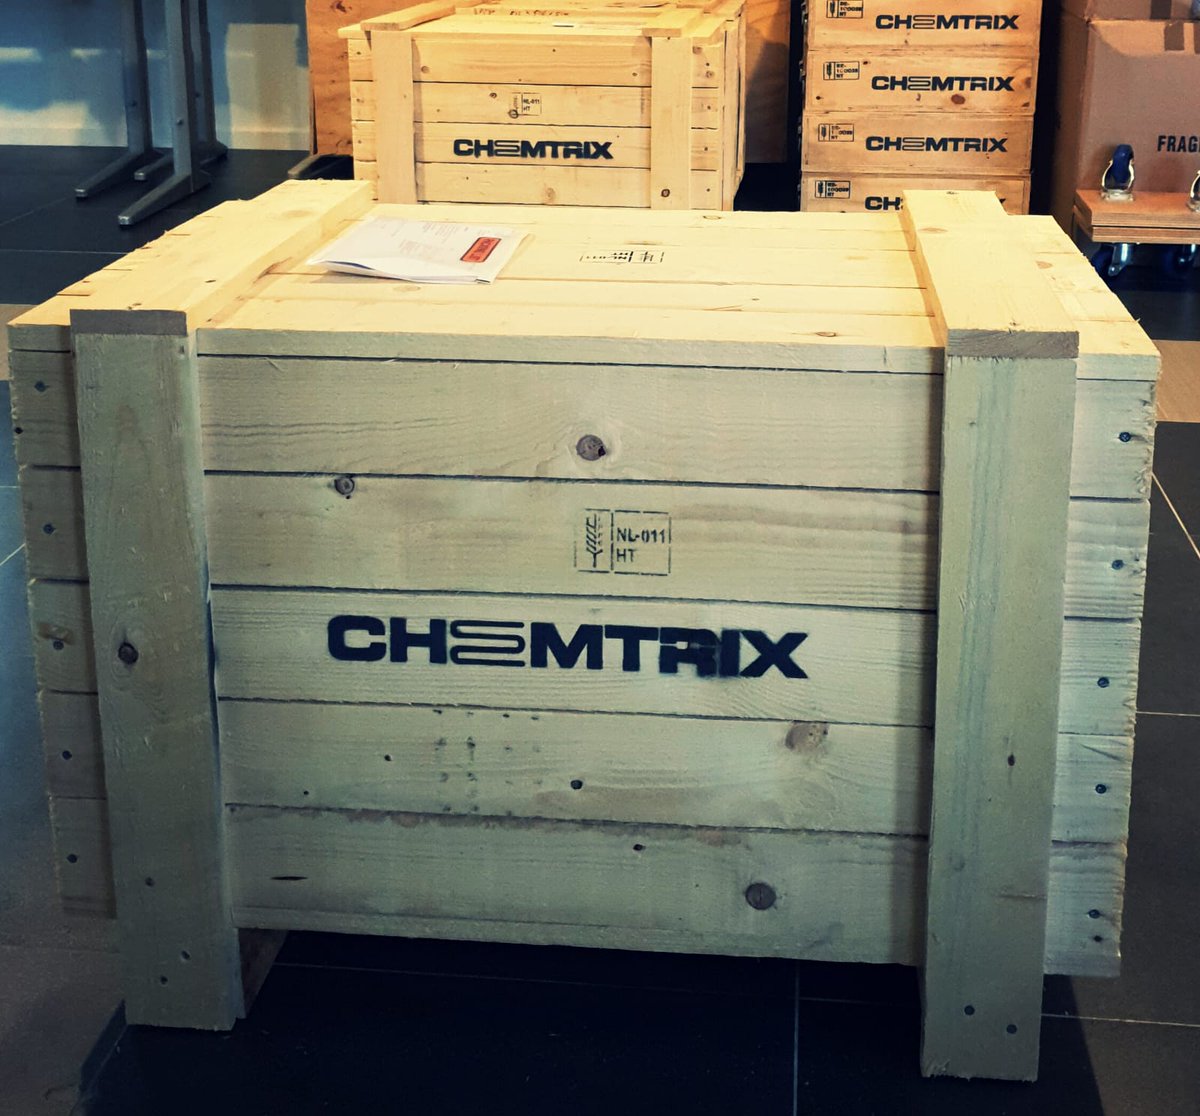 We are shipping a Plantrix MR260 #FlowReactor to its new Owner in India. With the Plantrix® MR260 flow reactor #ContinuousManufacturing is realised at the multi-tonne scale #IndustrialEngineering. Want to learn more about #Industrial process development using our Plantrix MR260 ?